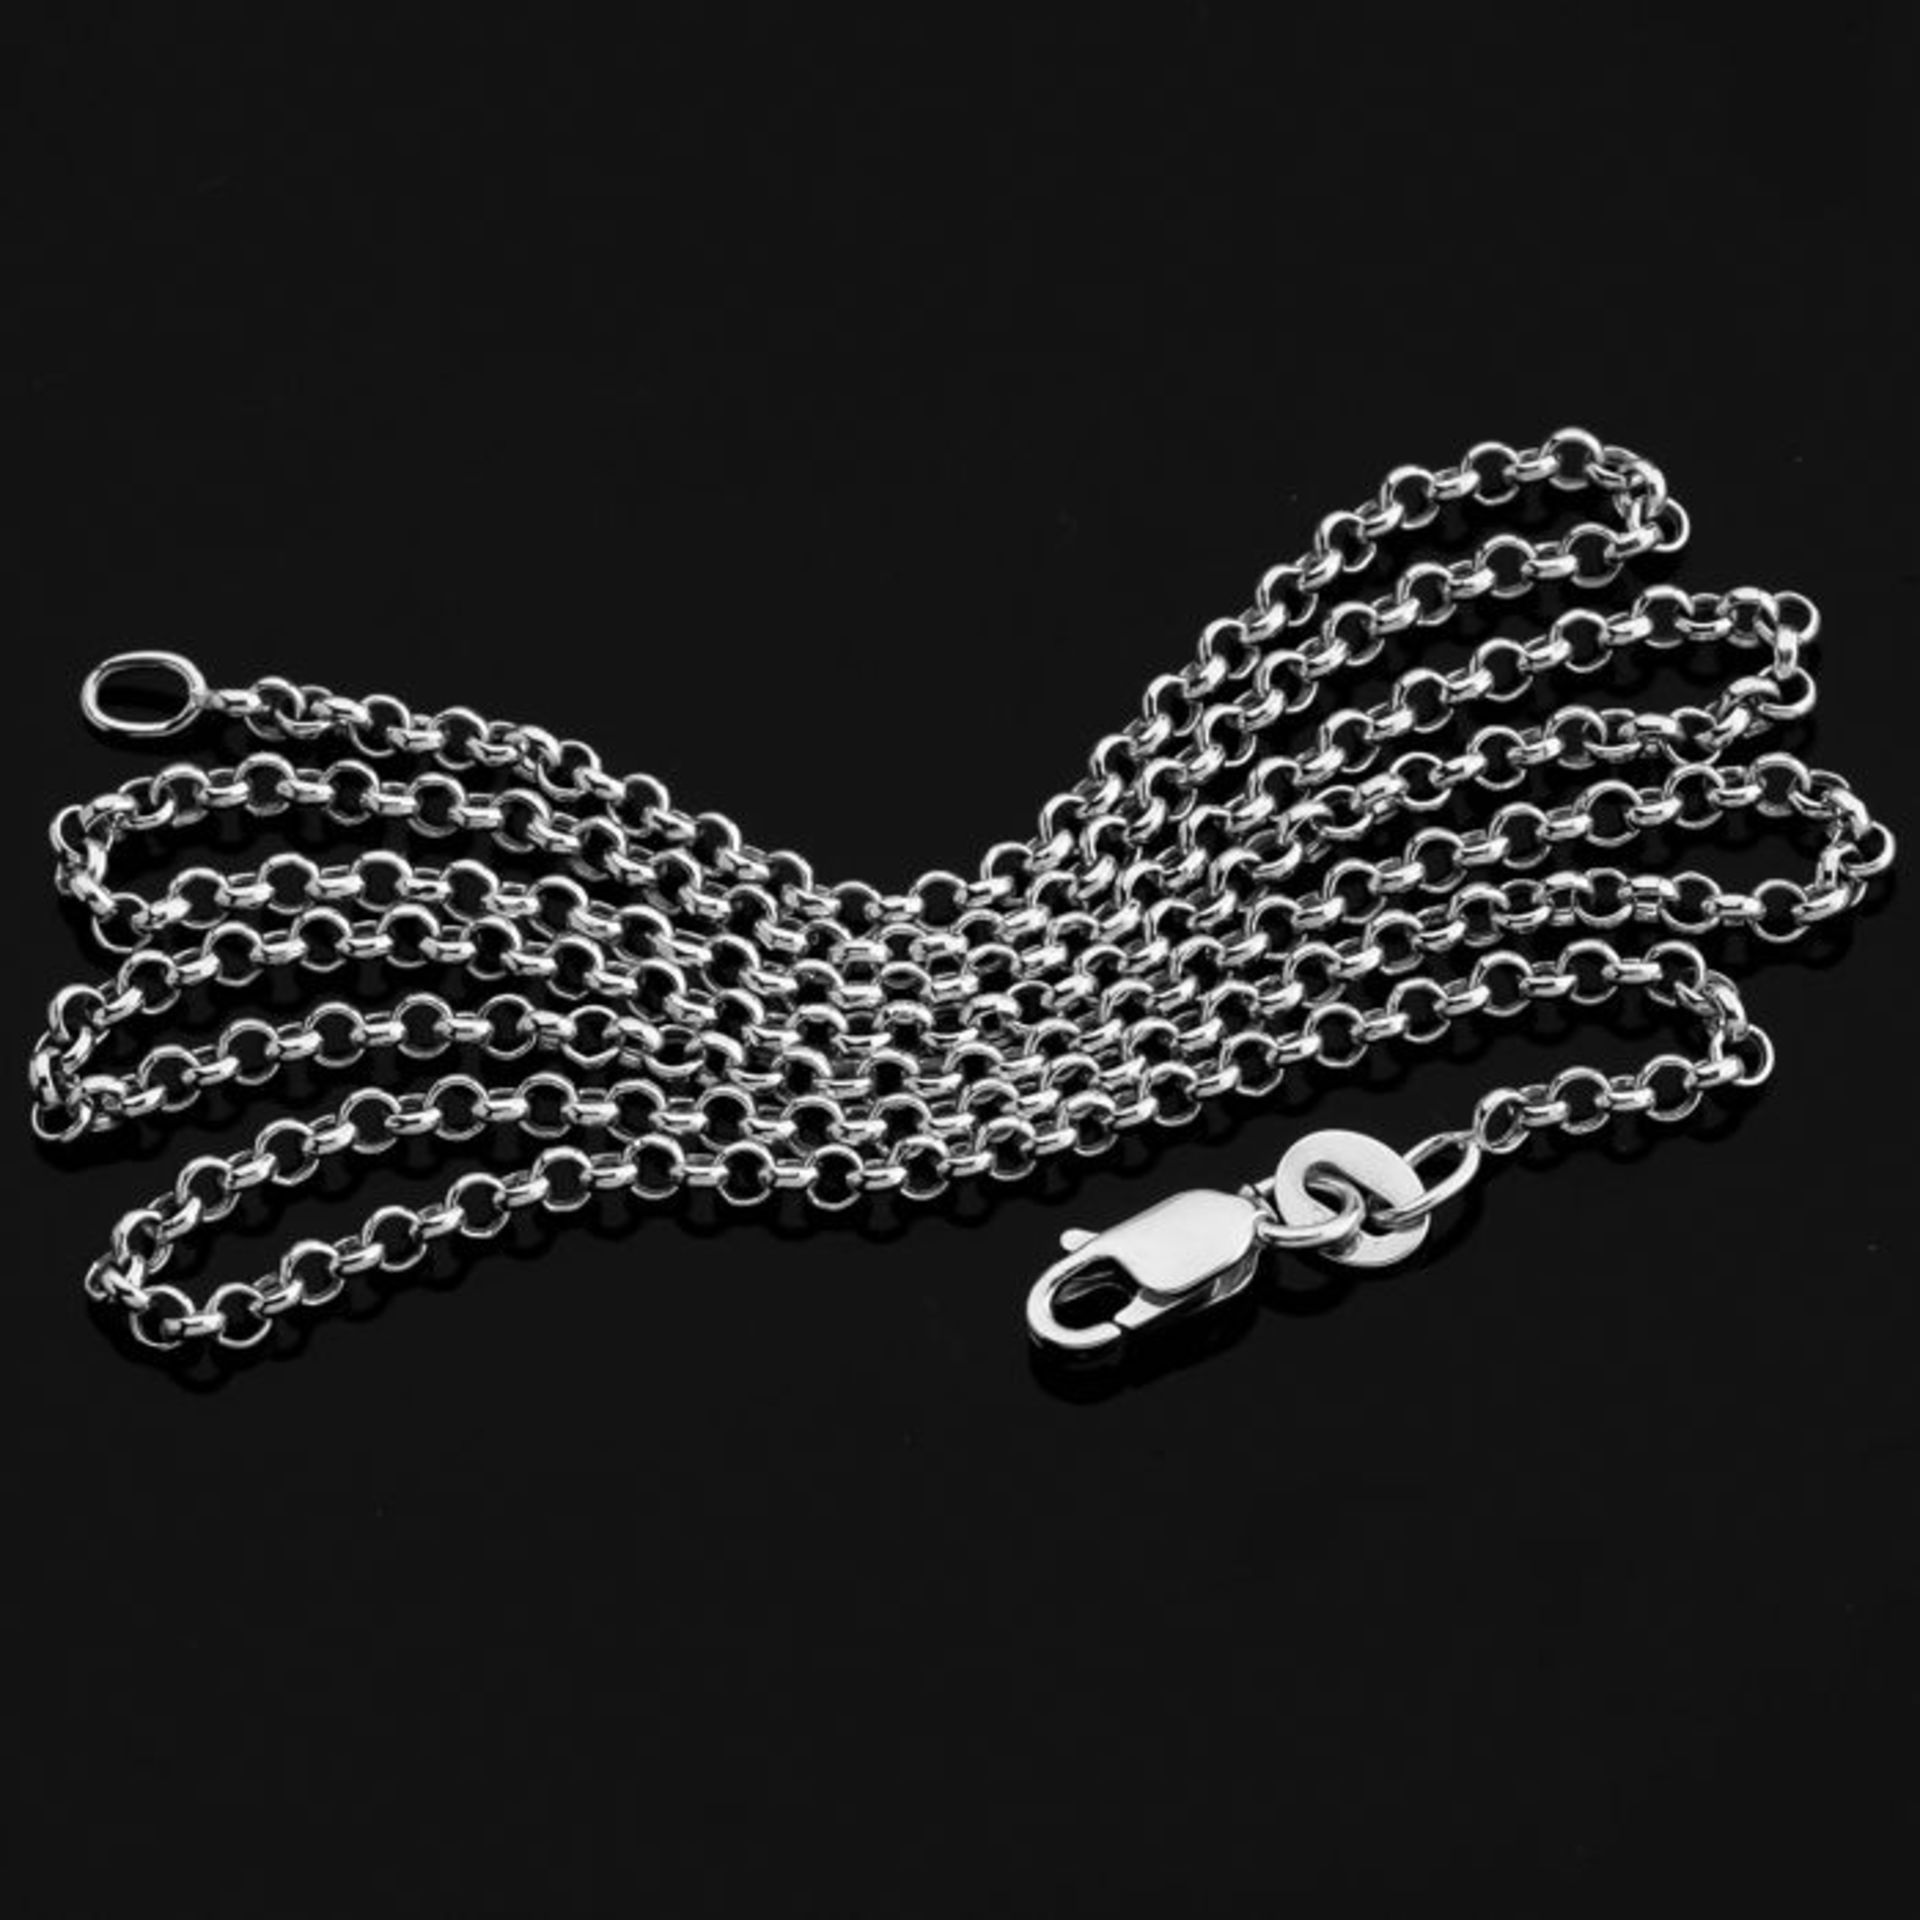 50 cm (19.7 in) Rolo Chain Necklace. In 14K White Gold - Image 3 of 3